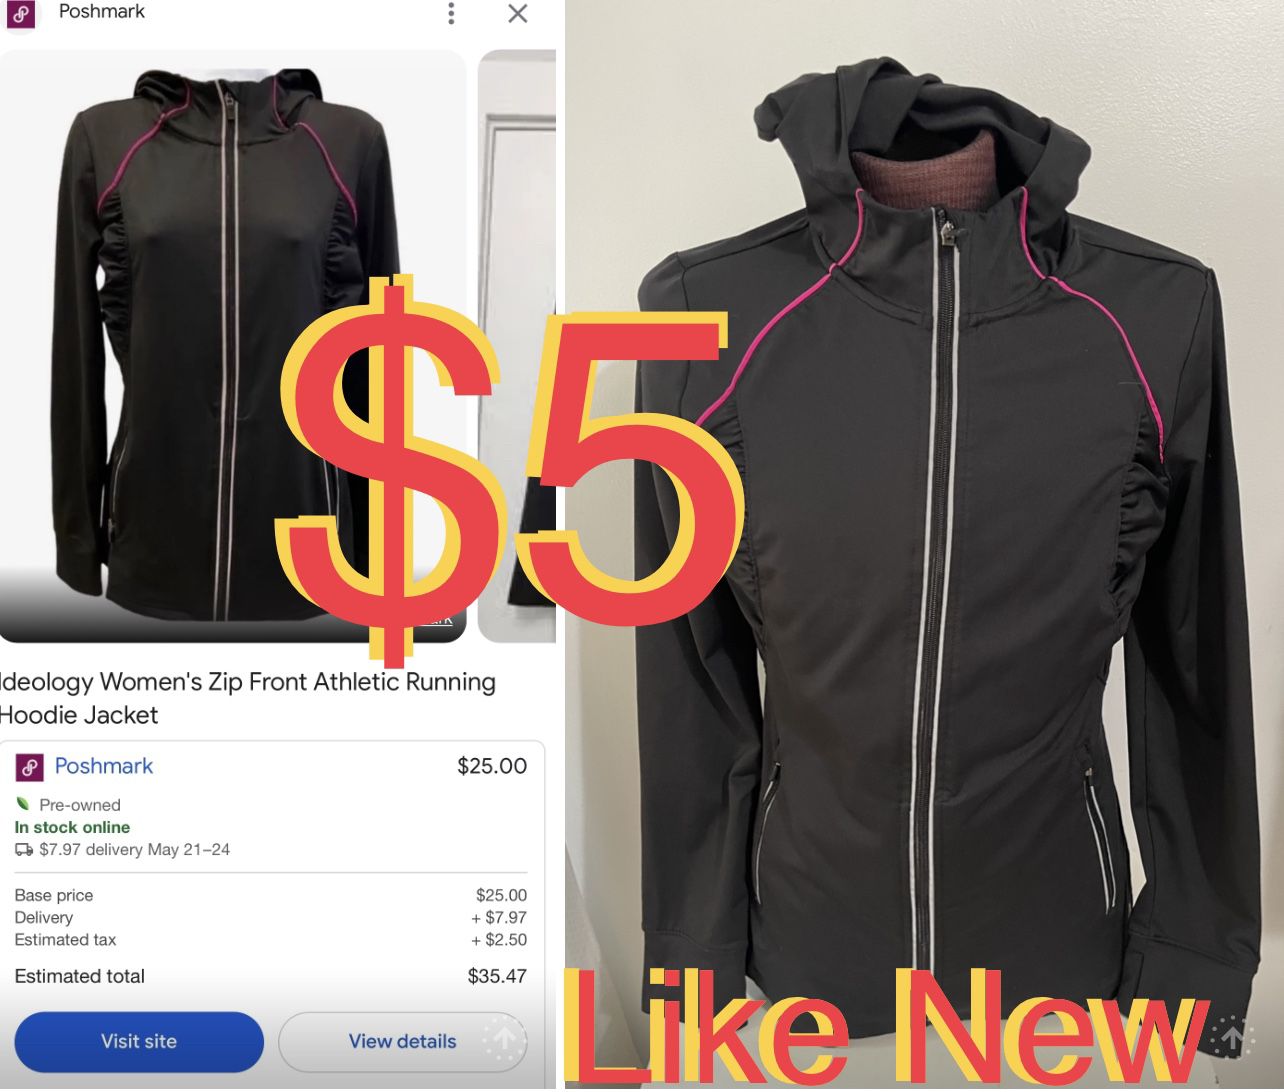 $5 in great condition Ideology Women zip Front Athletic Running Hoodie Jacket like new